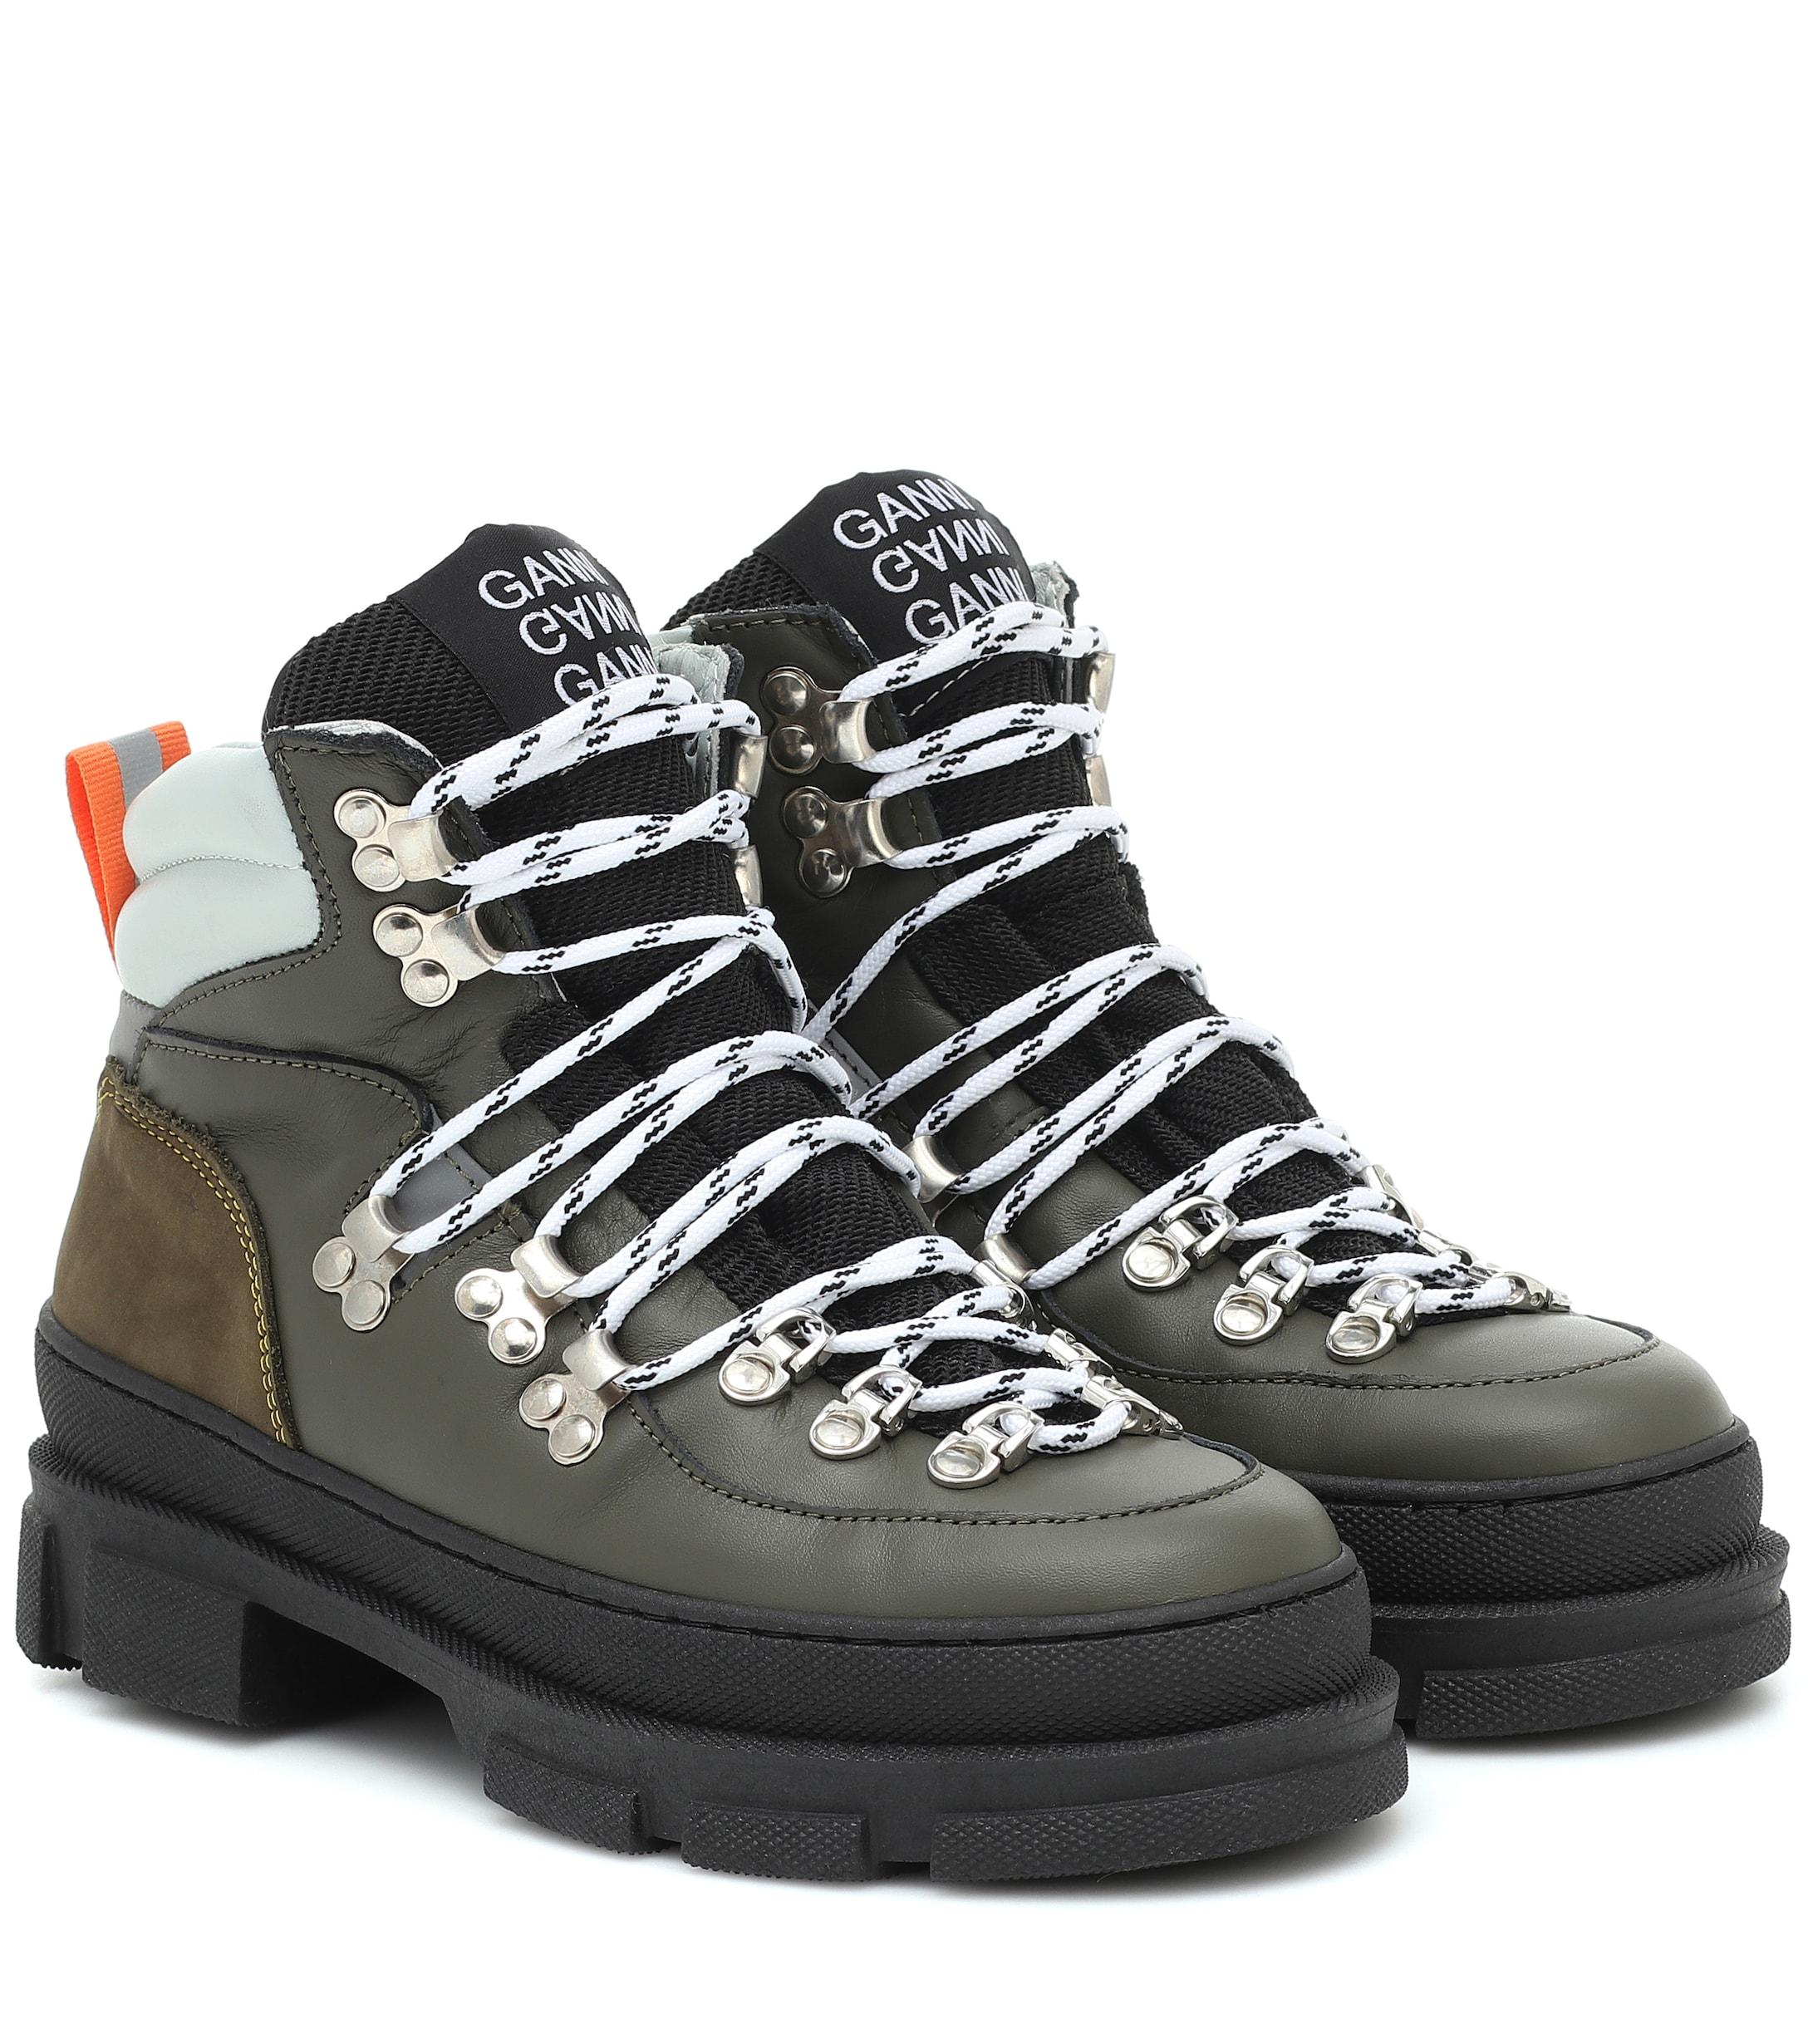 Ganni Sporty Hiking Leather Ankle Boots in Green - Lyst